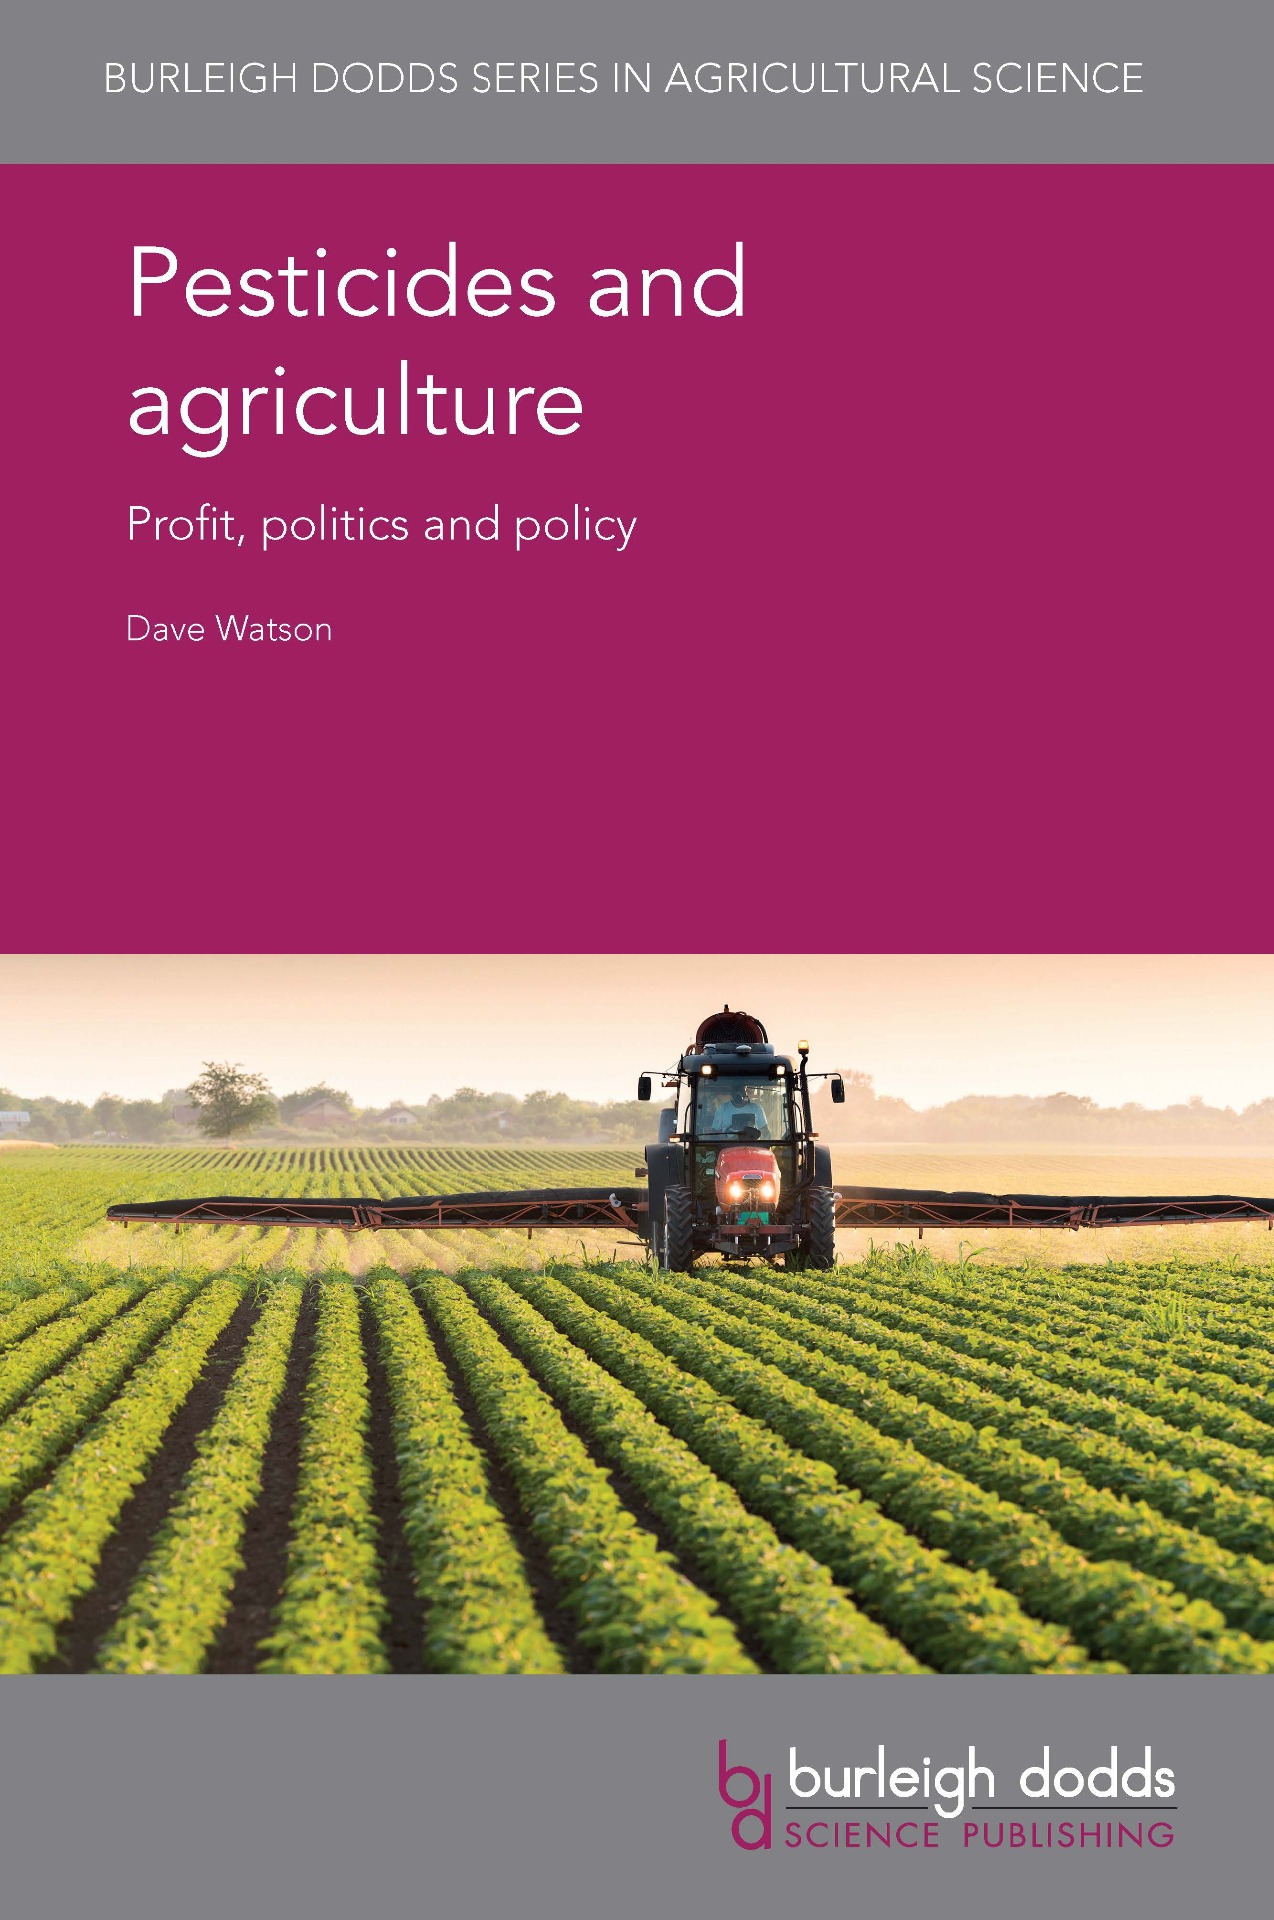 Pesticides and agriculture